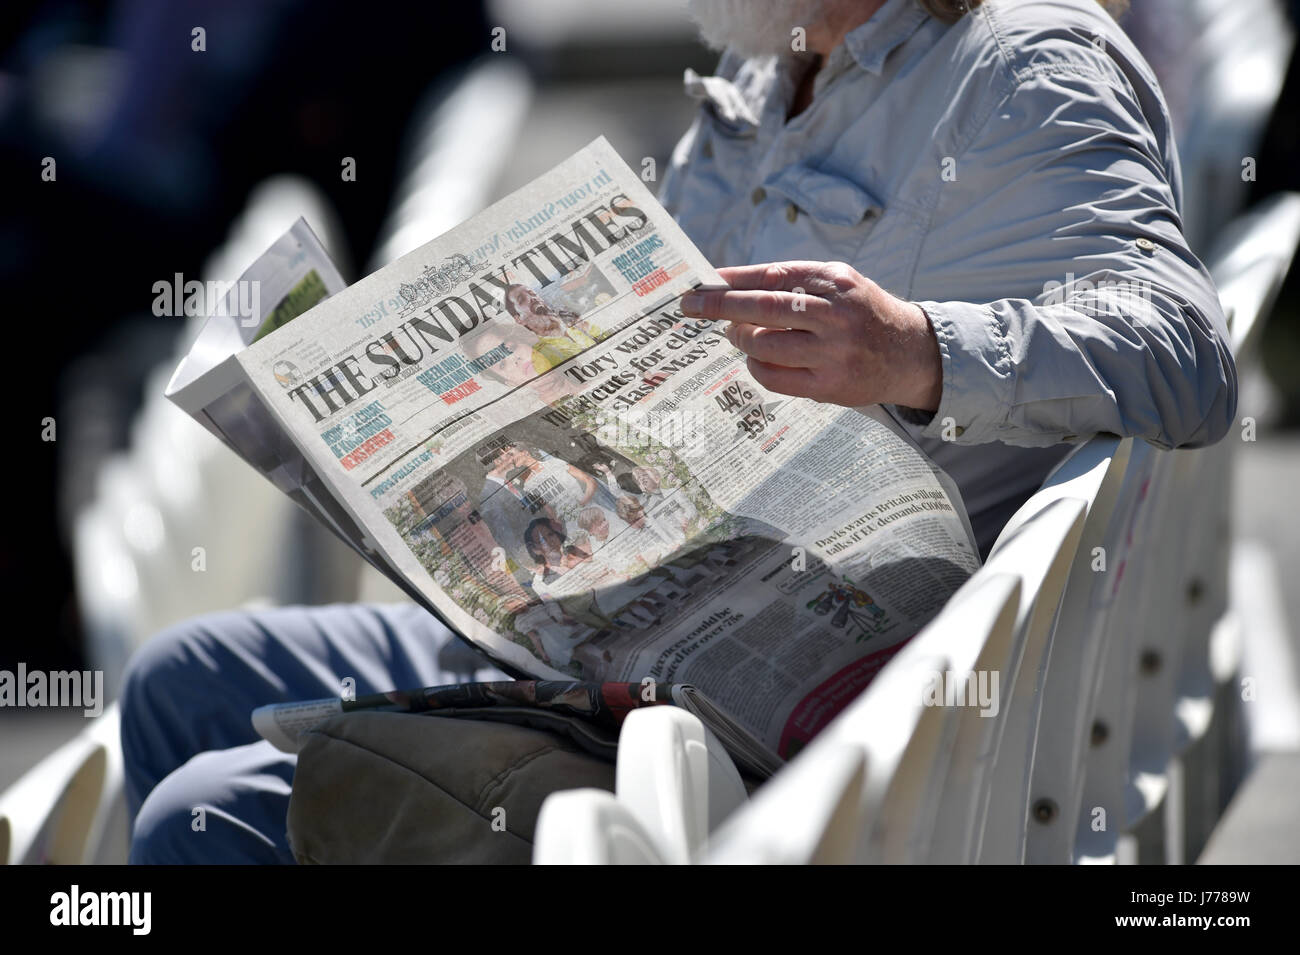 Man reading the Sunday Times newspaper Stock Photo